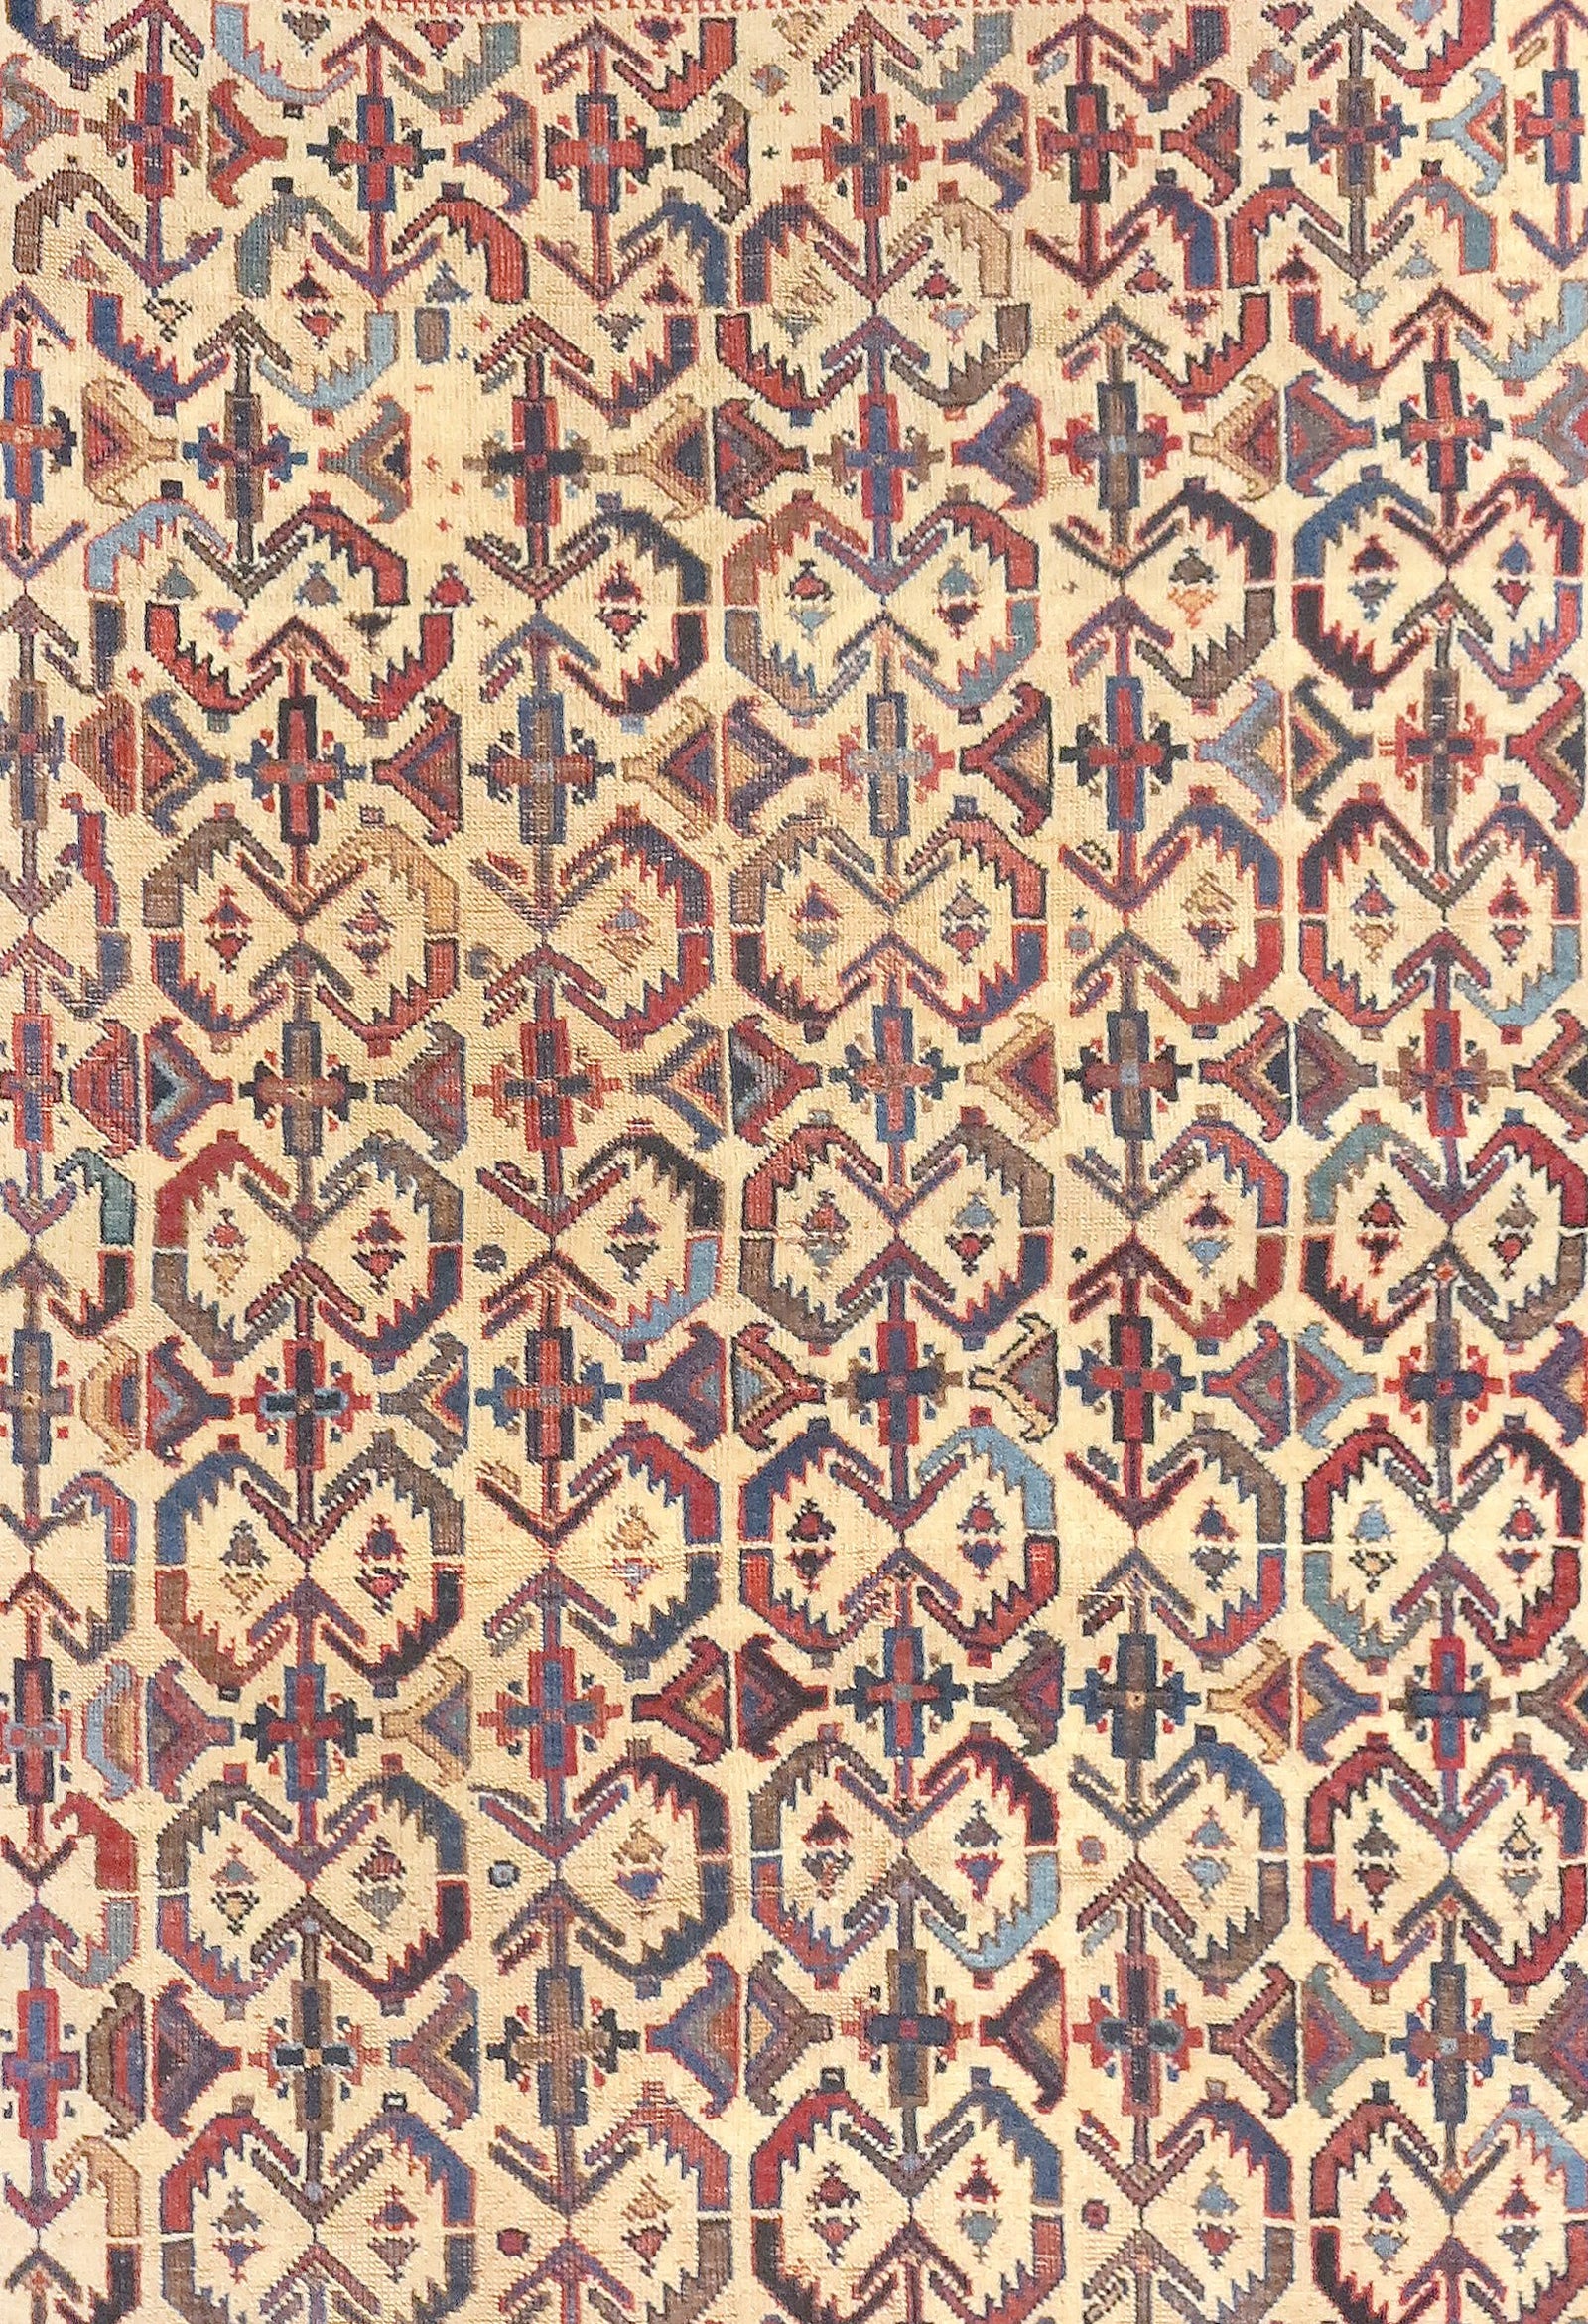 Antique Persian Tribal Afshar Area Rug